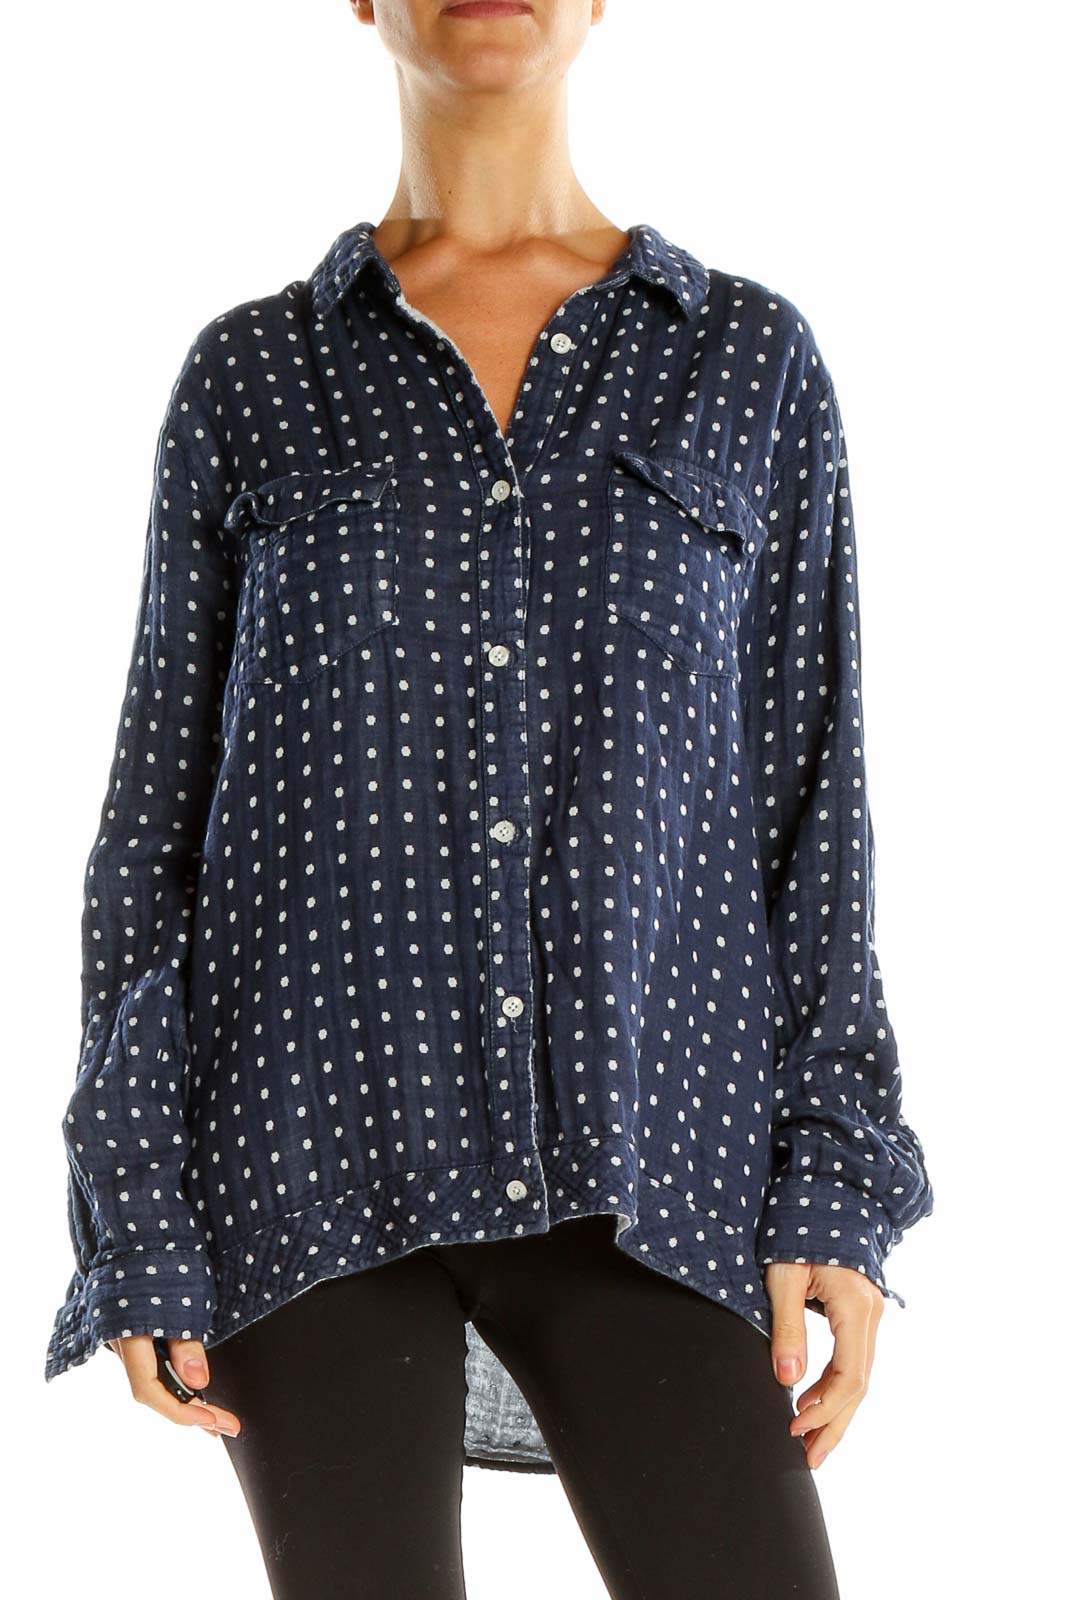 Blue Polka Dot Chic Top Front